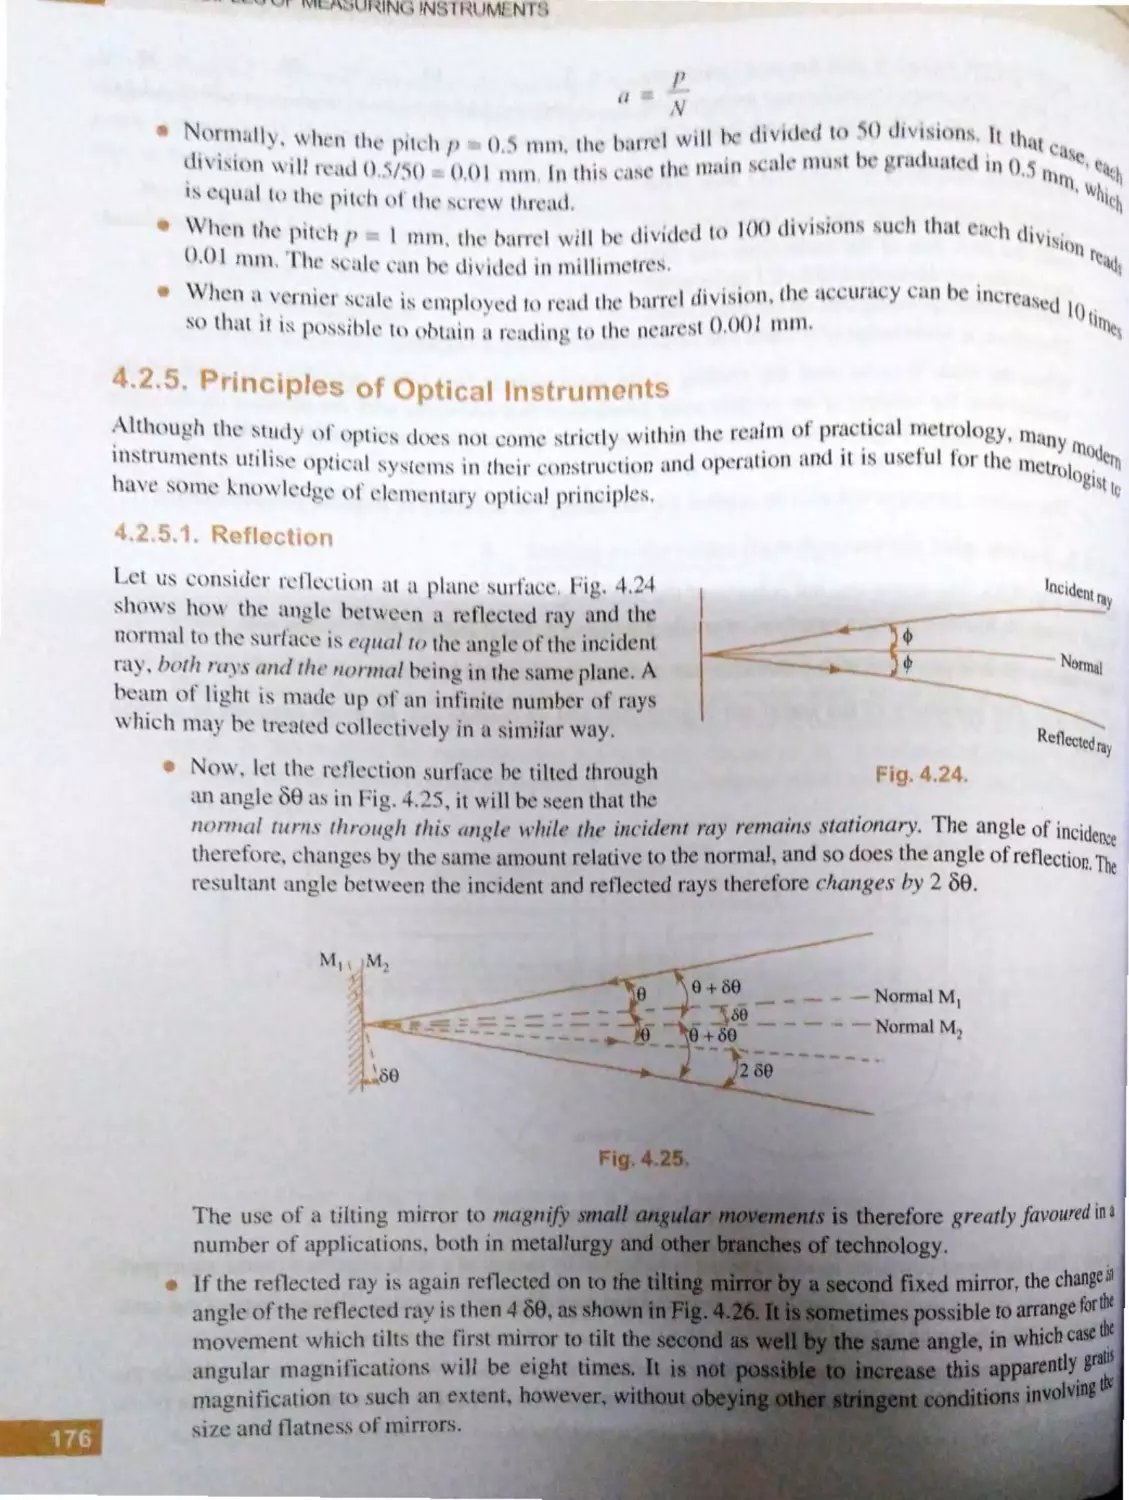 4.2.5. Principles of Optical Instruments